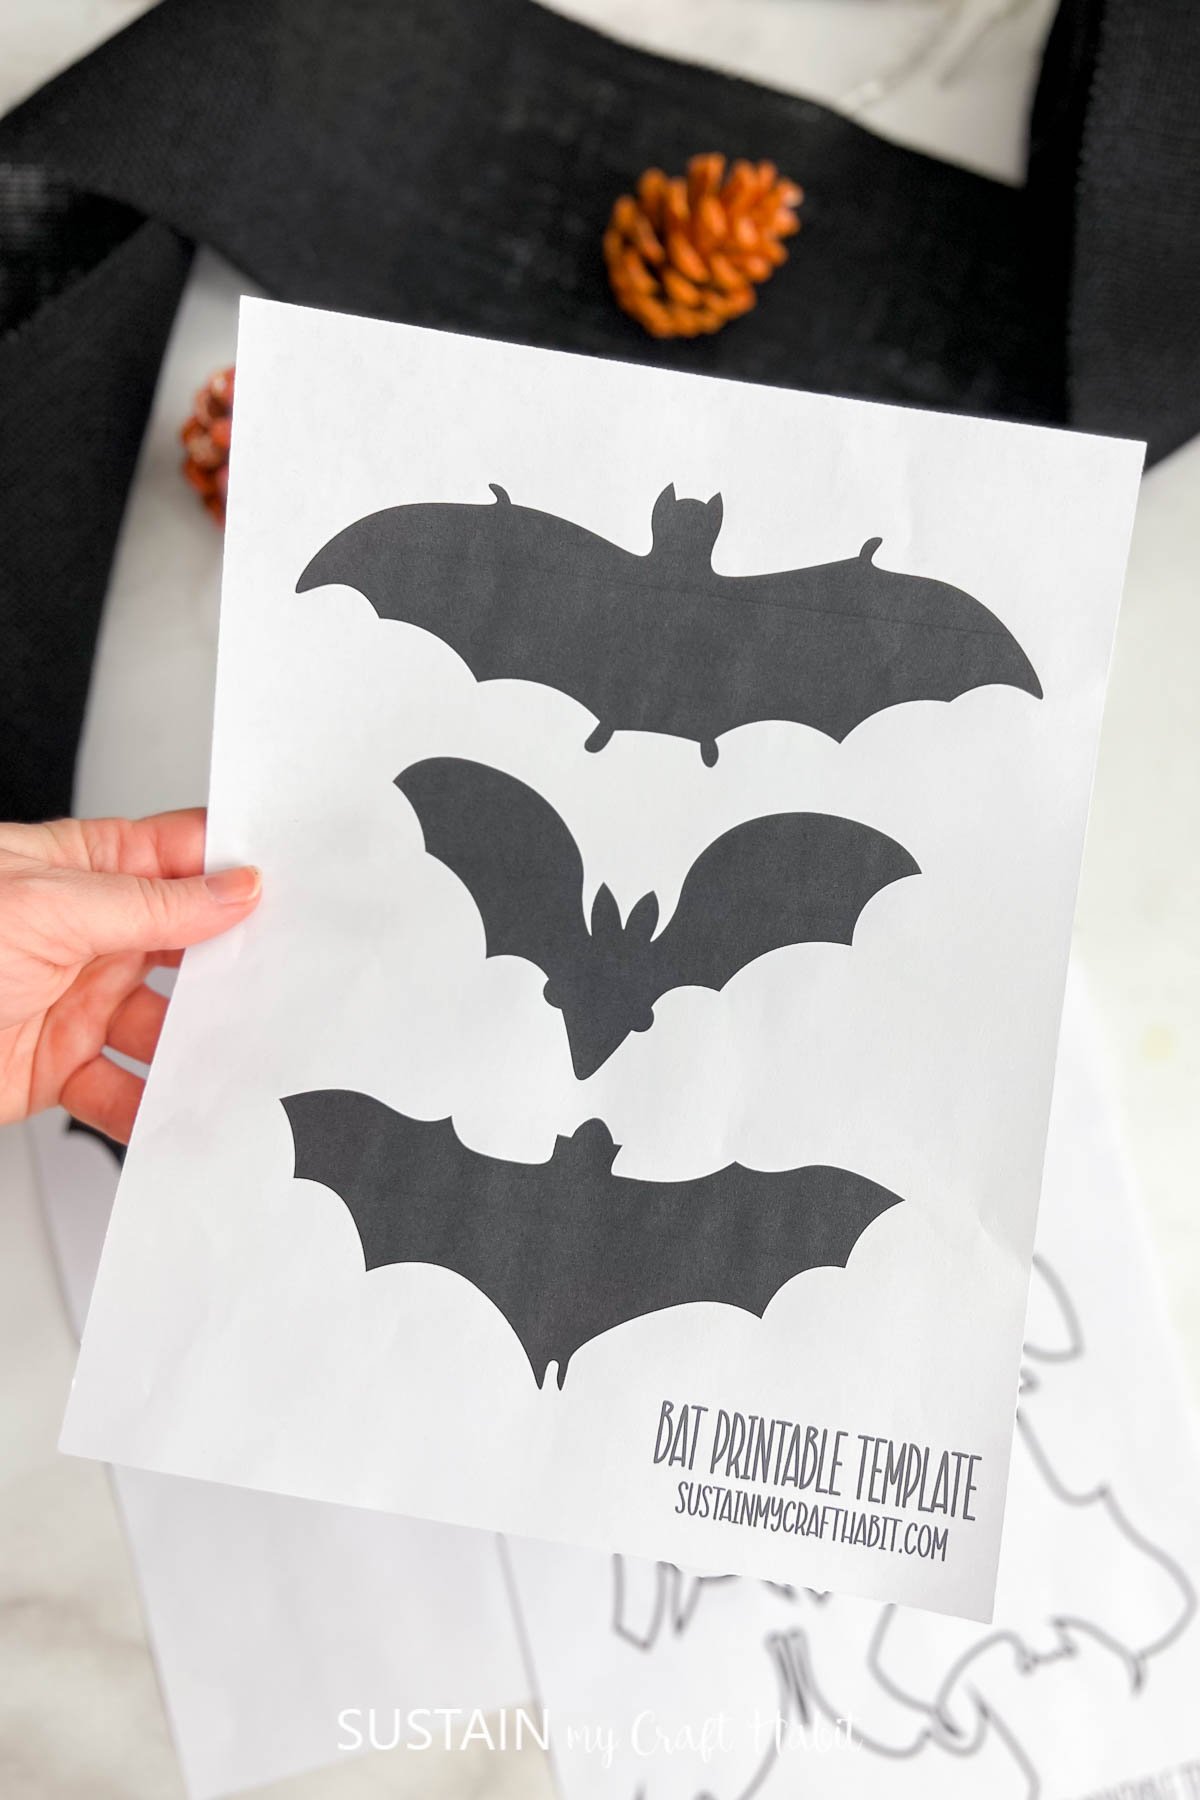 Printed paper with three small bat shapes.